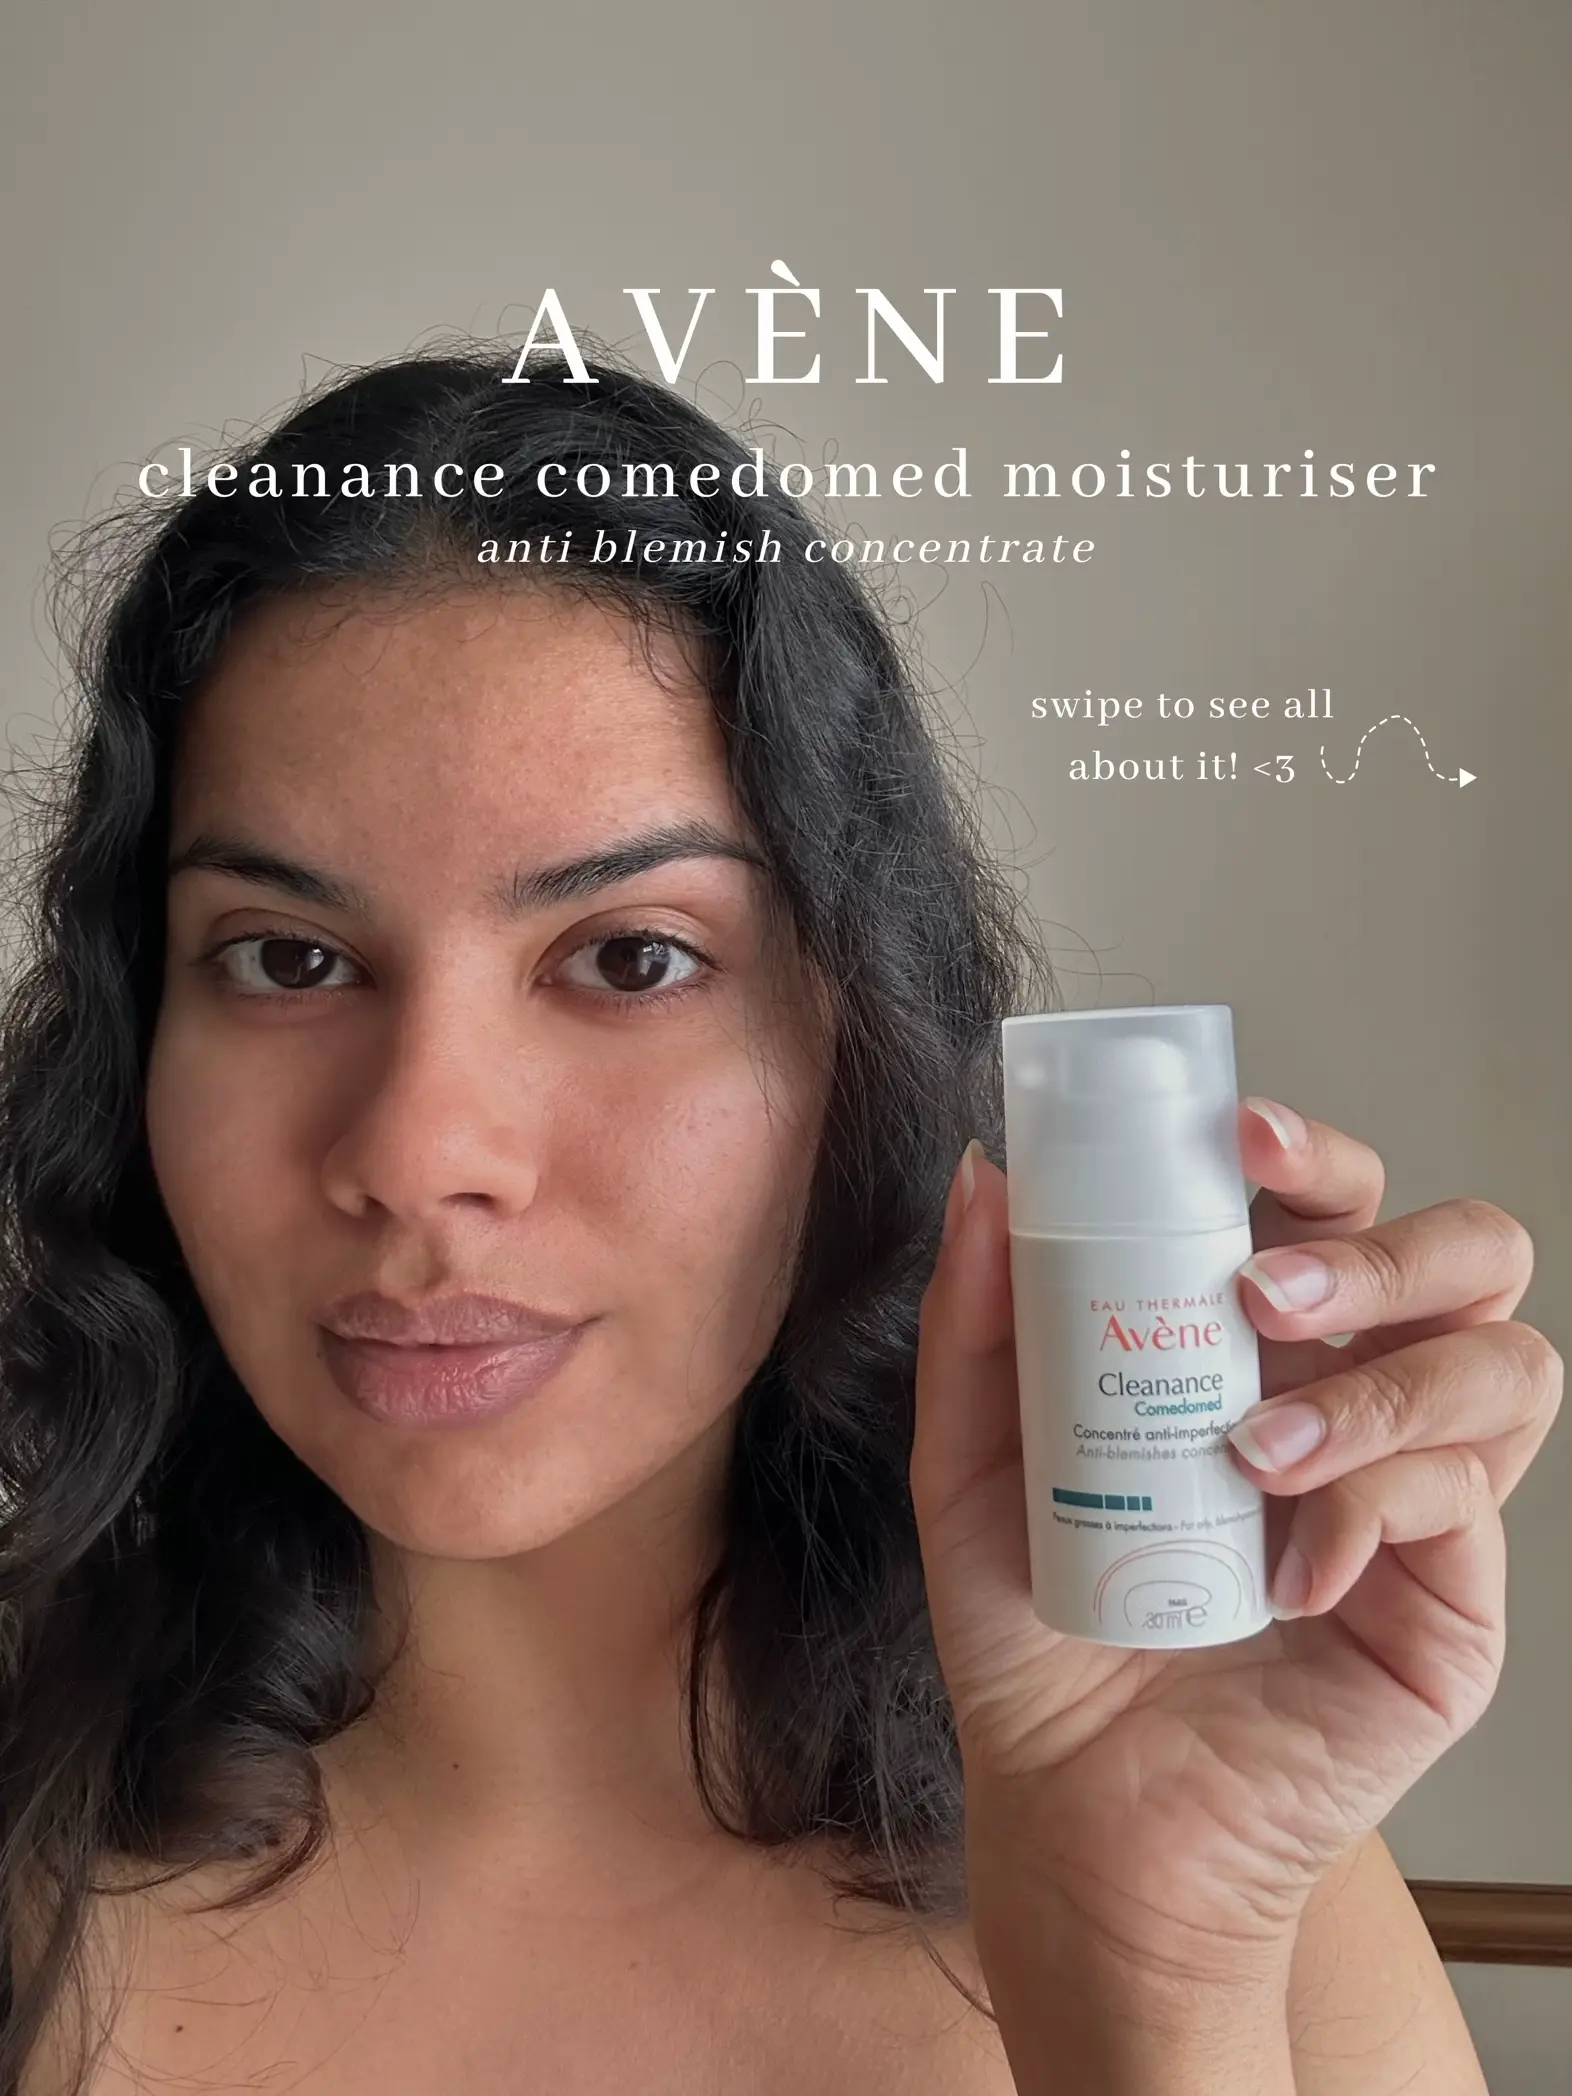 💛Avène Cleanance Comedomed Moisturiser💛, Gallery posted by Tanisha 🌻🤍